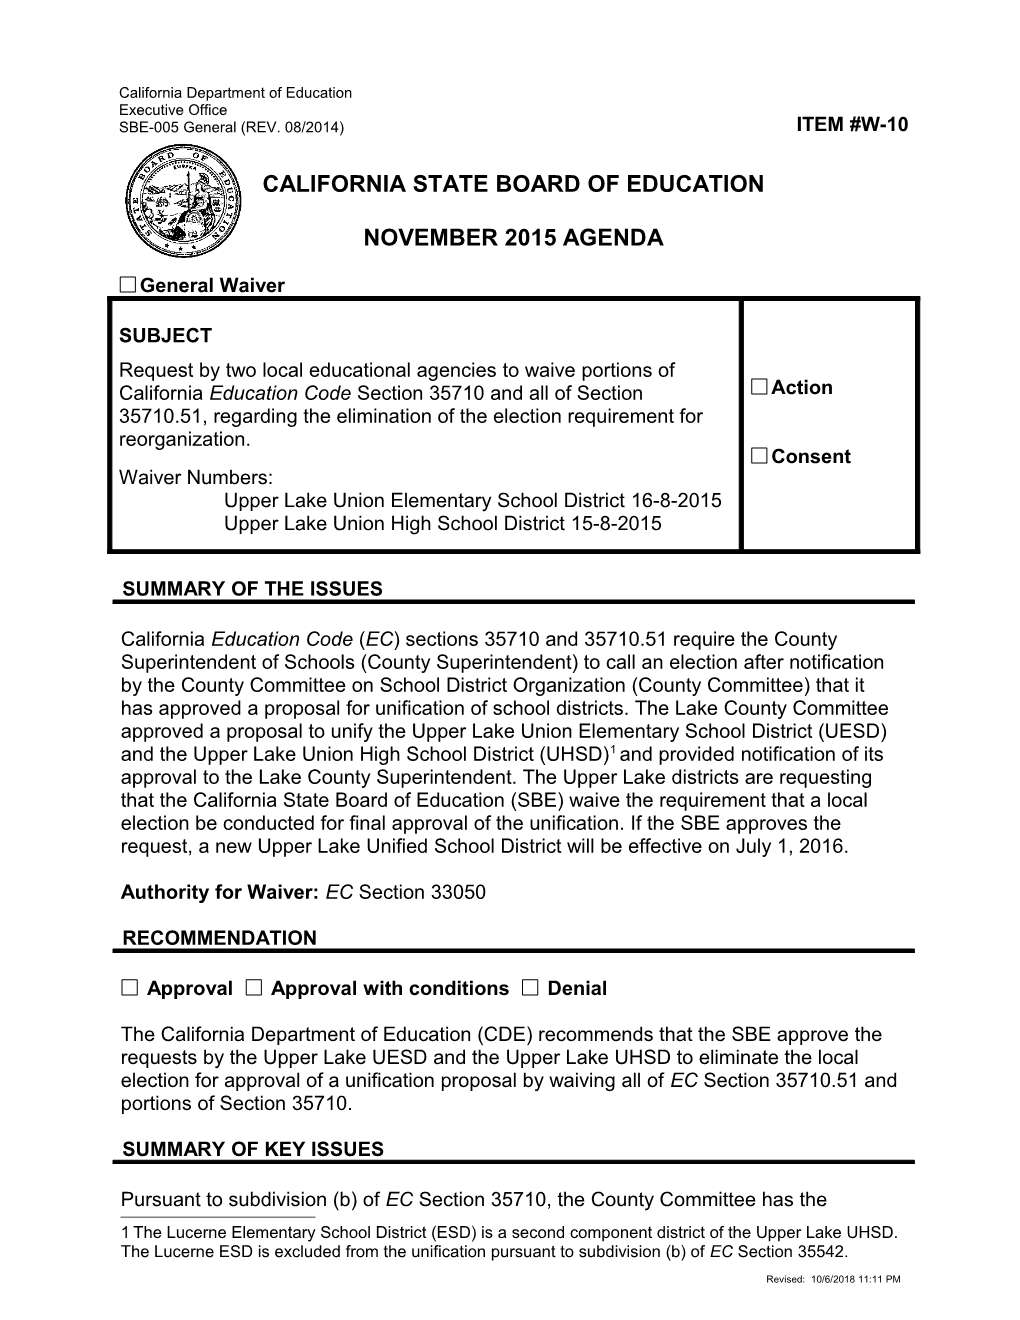 November 2015 Waiver Item W-10 - Meeting Agendas (CA State Board of Education)